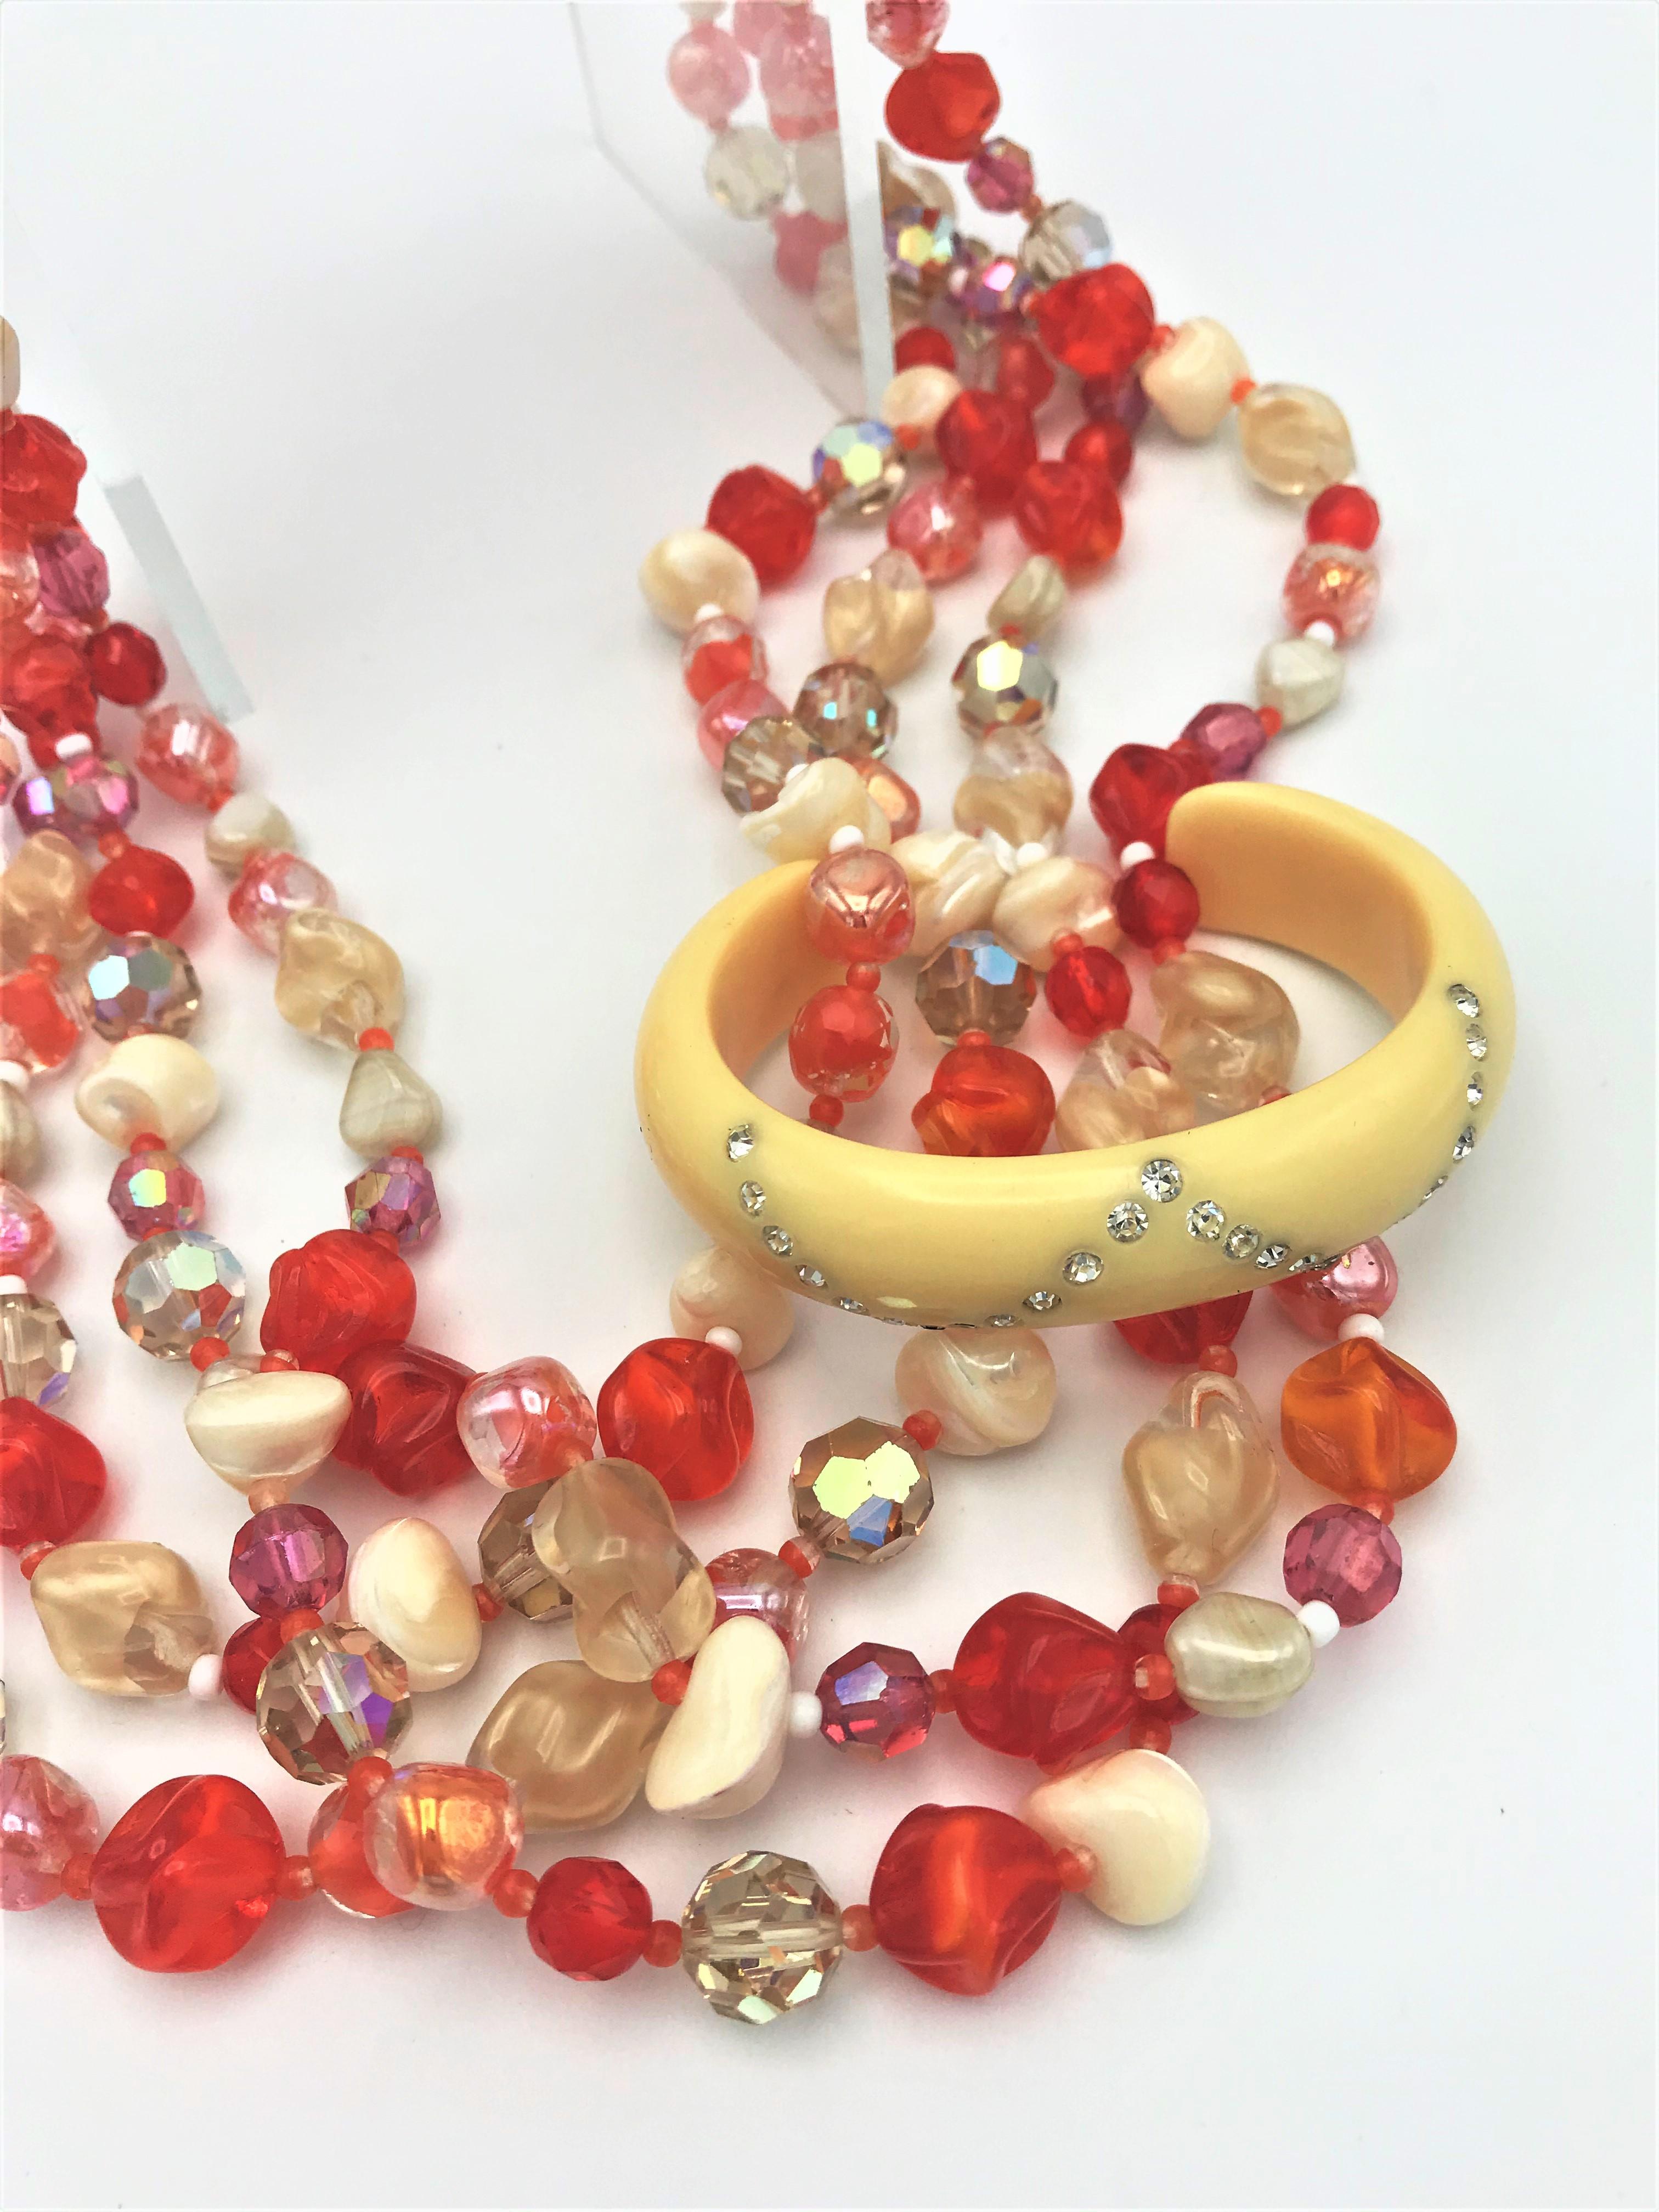 Women's Hattie Carnegie 4 row necklace with different  beads and different colors, 1950s For Sale